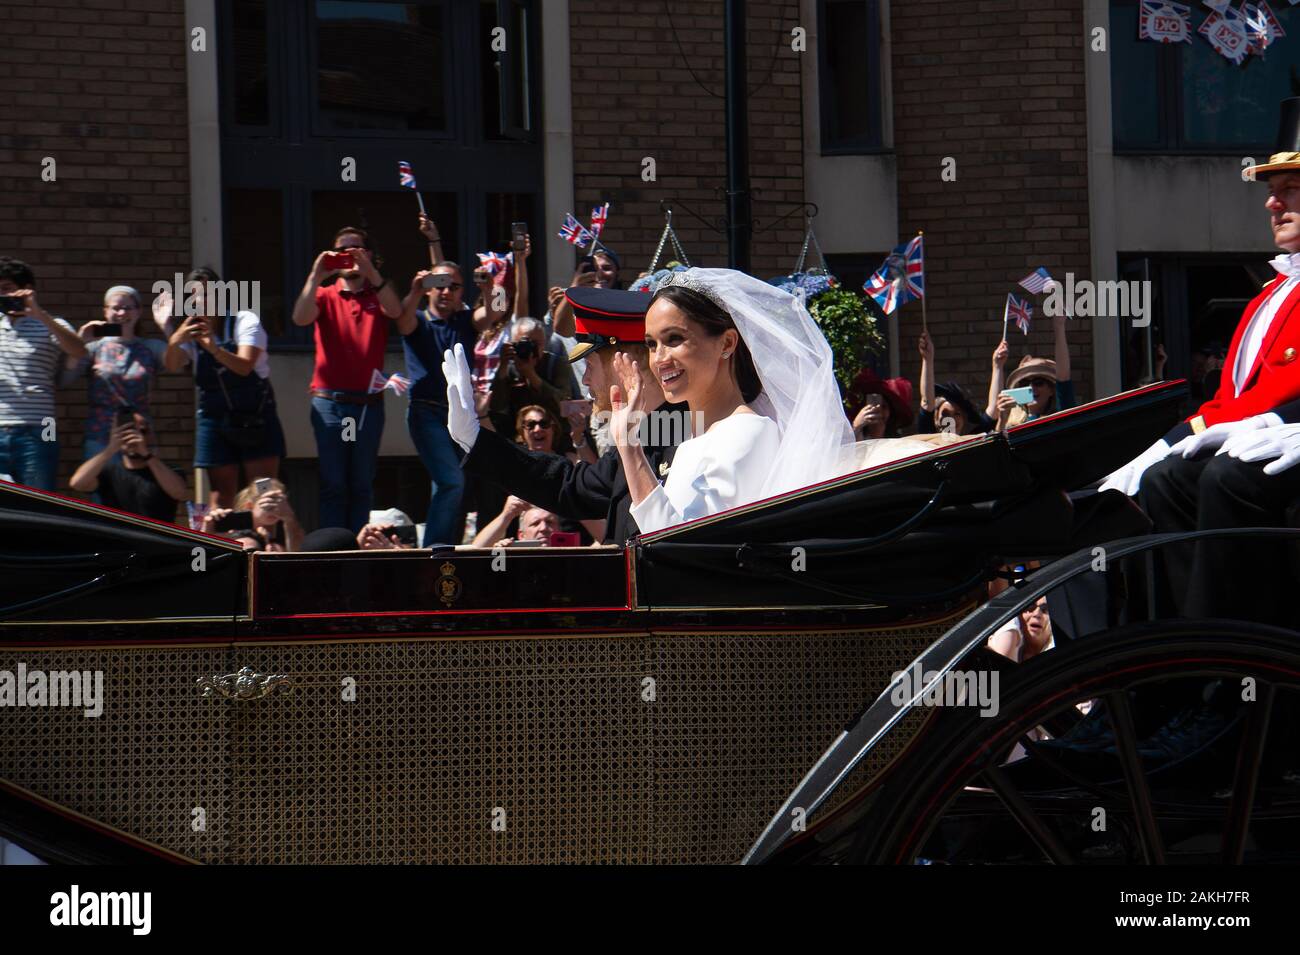 Sheet Street, Windsor, Berkshire, UK. 19th May, 2018. Well wishers, Royal fans, locals and tourists wave at the newly wed Prince Harry and Meghan Markle following their Royal Wedding at Windsor Castle. The couple were taken in a horse drawn carriage through the town and were warmly greeted by thousands of well wishers. Credit: Maureen McLean/Alamy Stock Photo